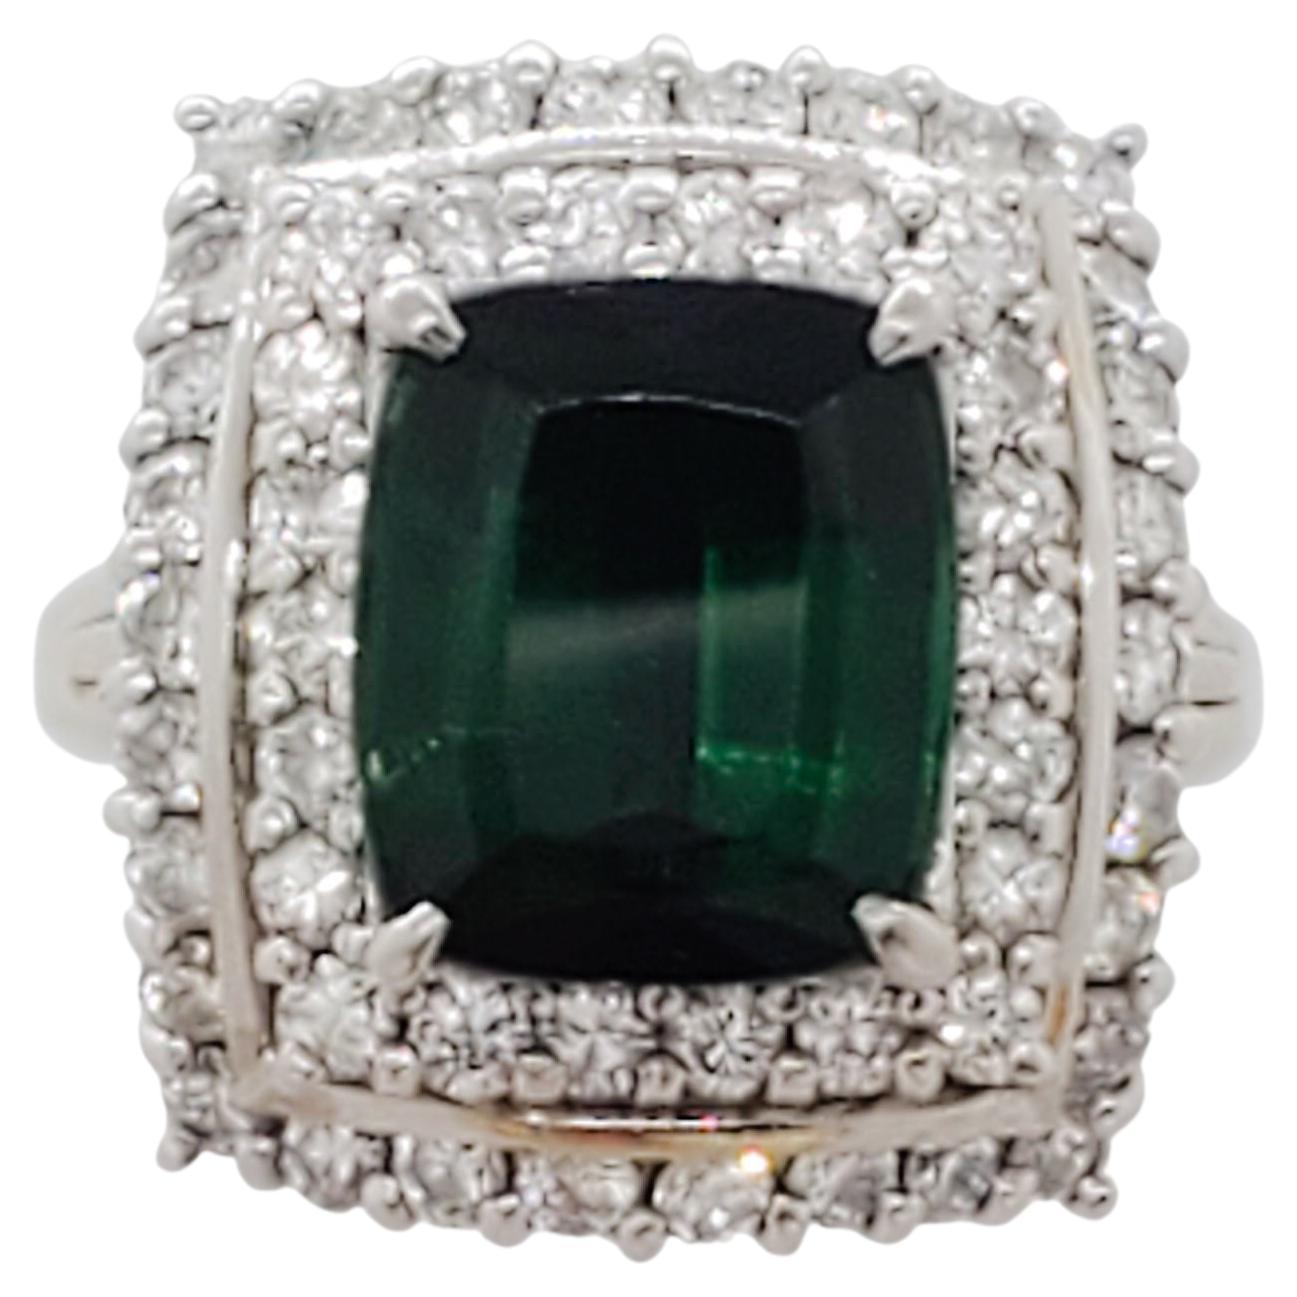 Green Tourmaline and Diamond Cocktail Ring in Platinum